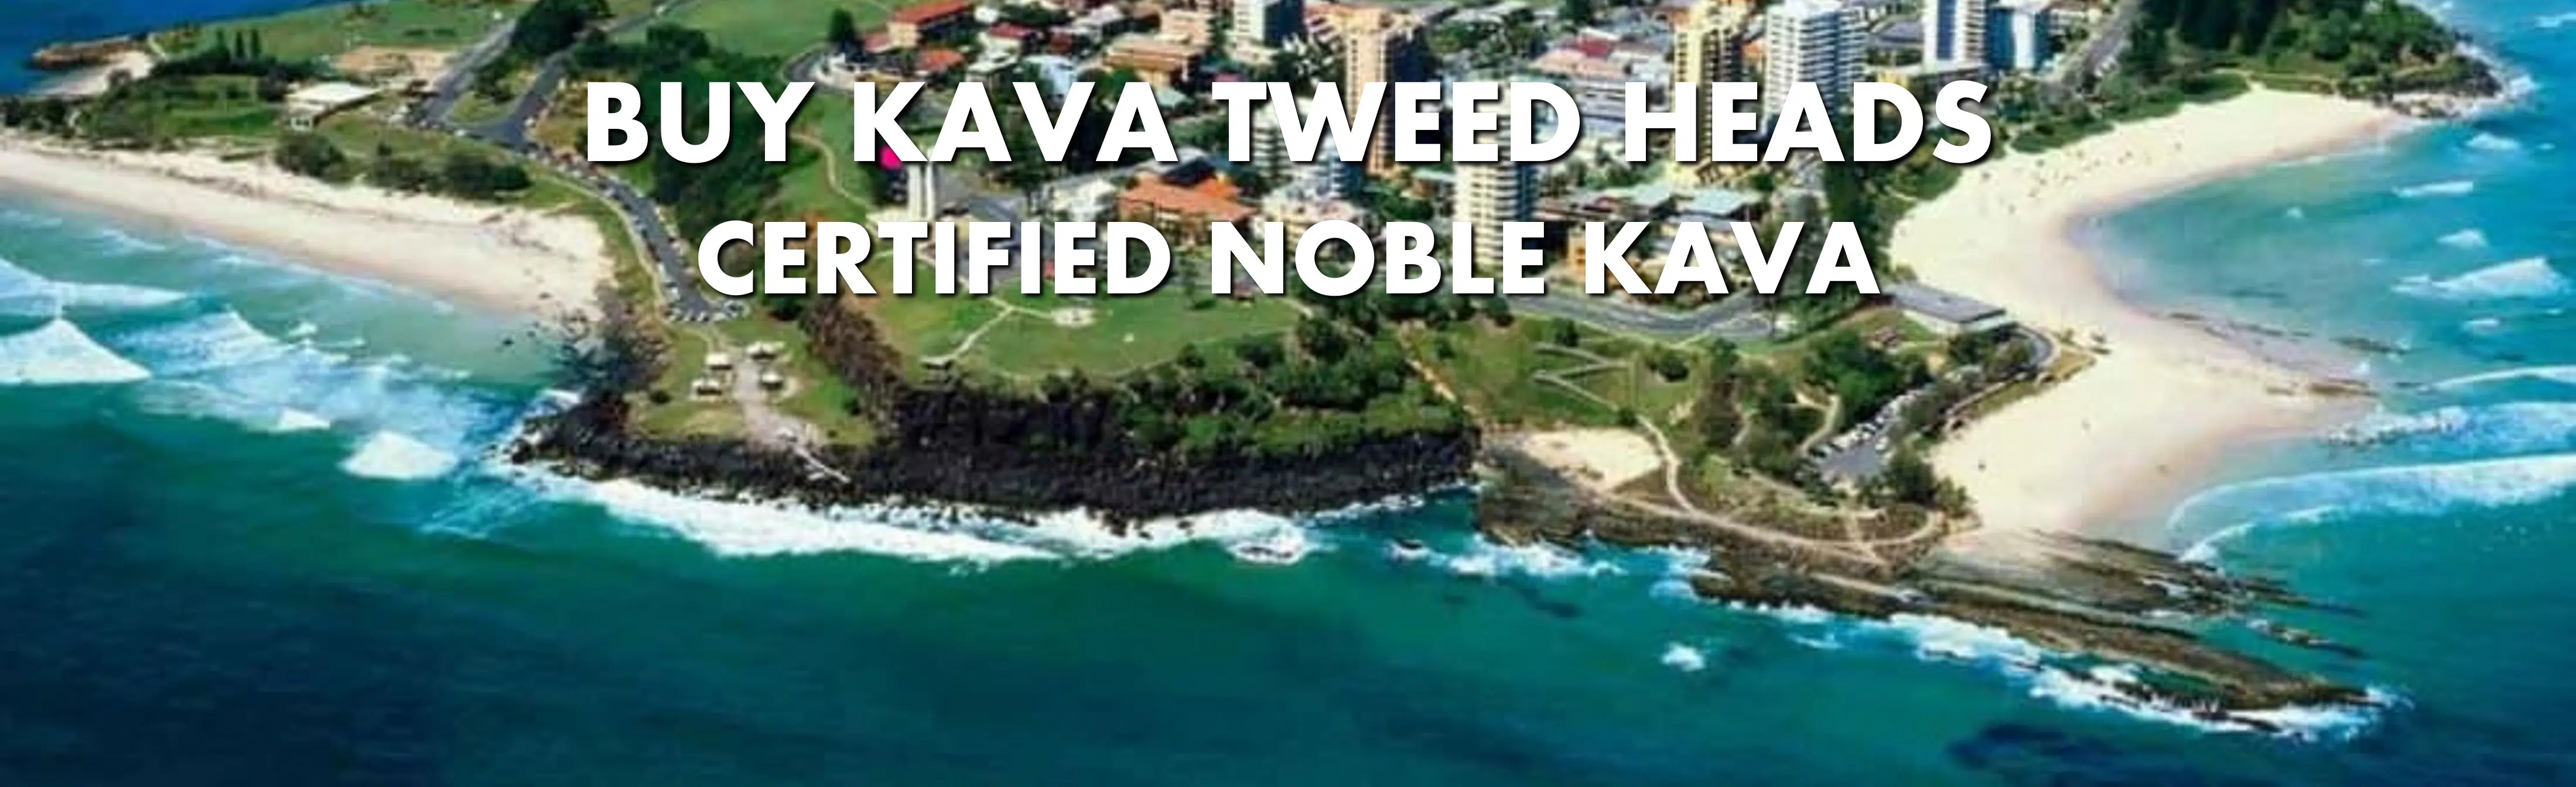 Aerial view of Tweed Heads with caption Buy Kava Tweed Heads Certified Noble Kava